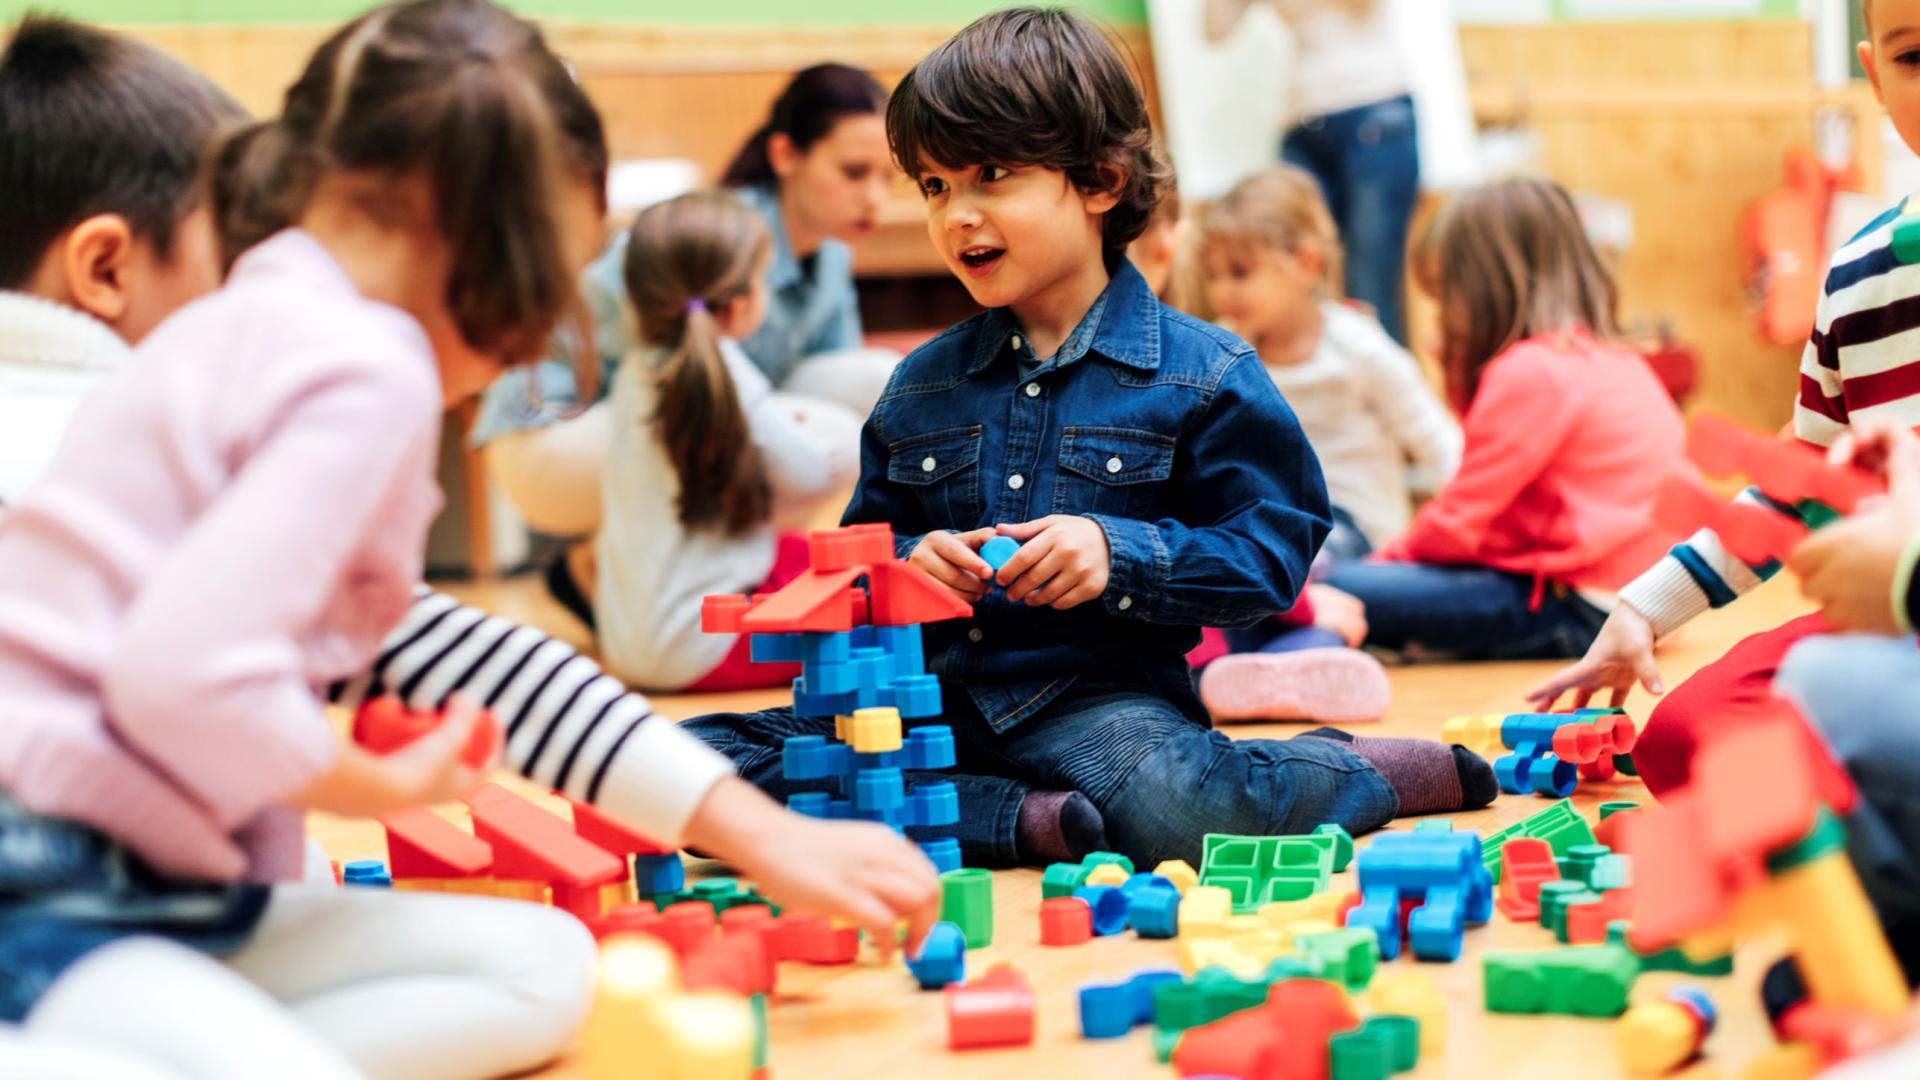 Two free public webinars on the importance of play in early childhood